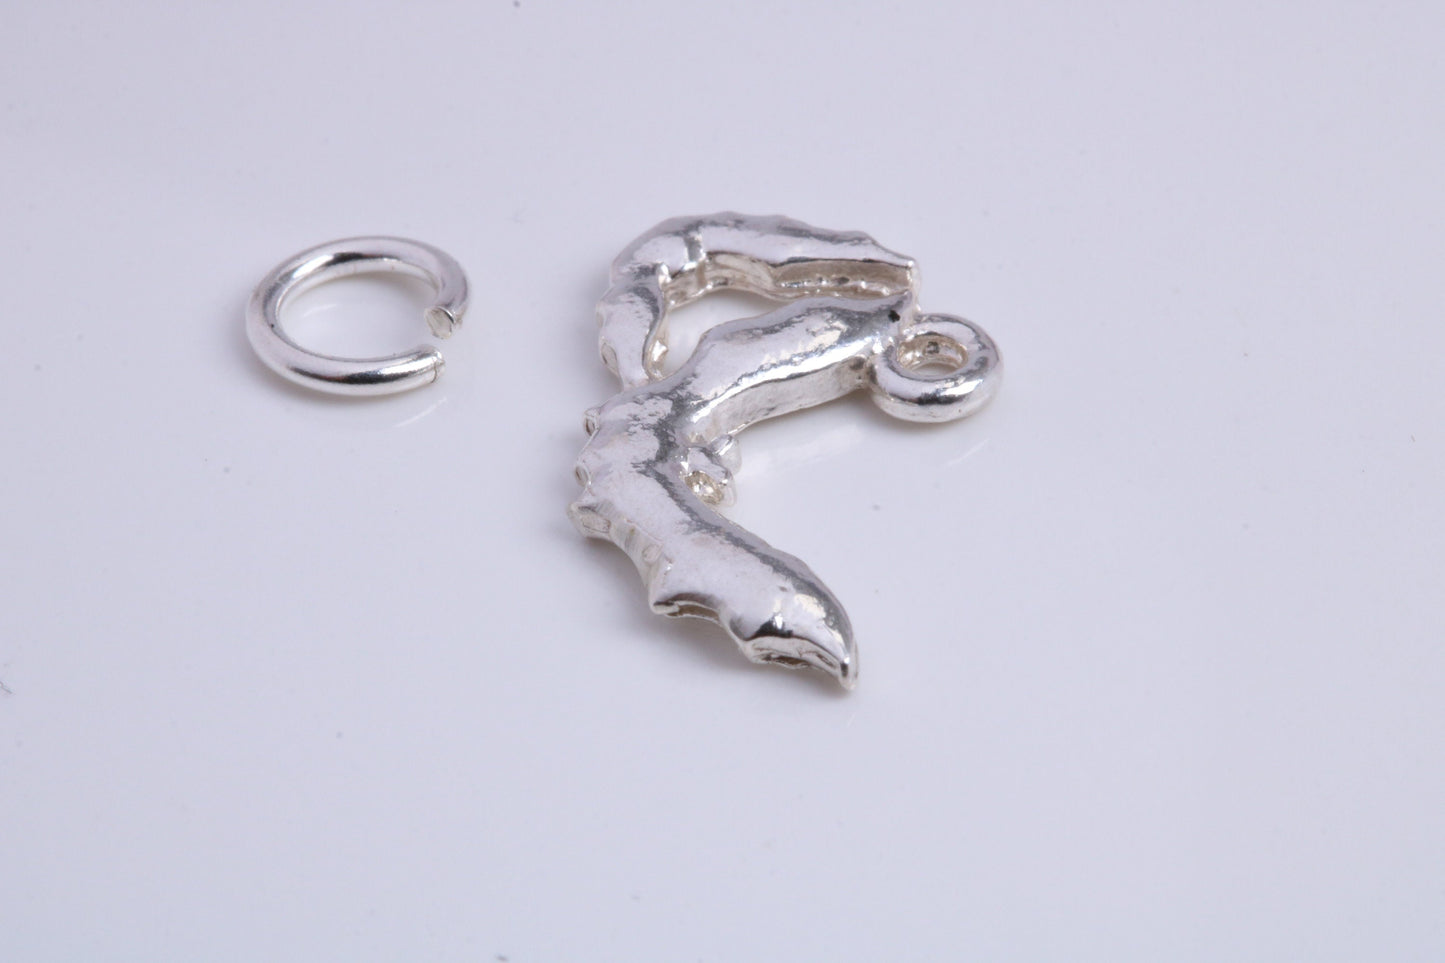 Shrimp Charm, Traditional Charm, Made from Solid 925 Grade Sterling Silver, Complete with Attachment Link